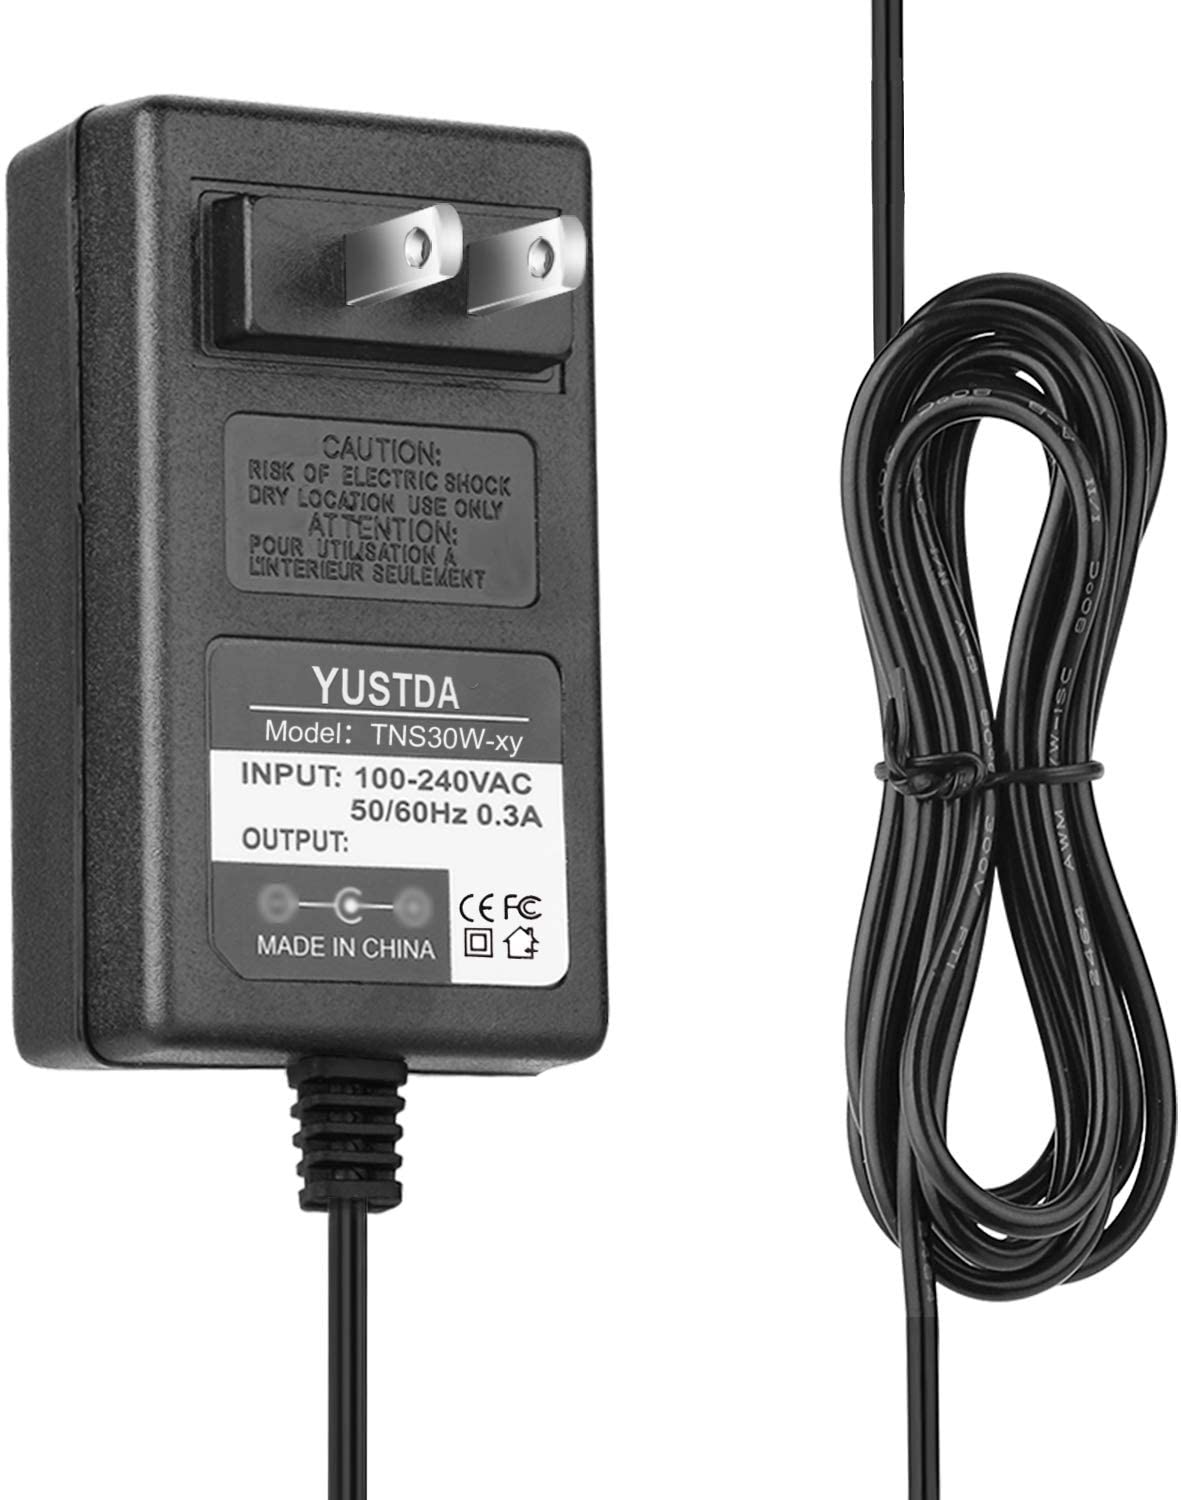 12v Ac Dc Adapter for AverMedia AverVision CP 130 135 155 300 355 530 330 CP135 VISNCP135 M70 P0B7A POB7A cp150 150 300i 300p 300AF+ POE3 Document Camera Power Supply Cord Charger - image 1 of 4